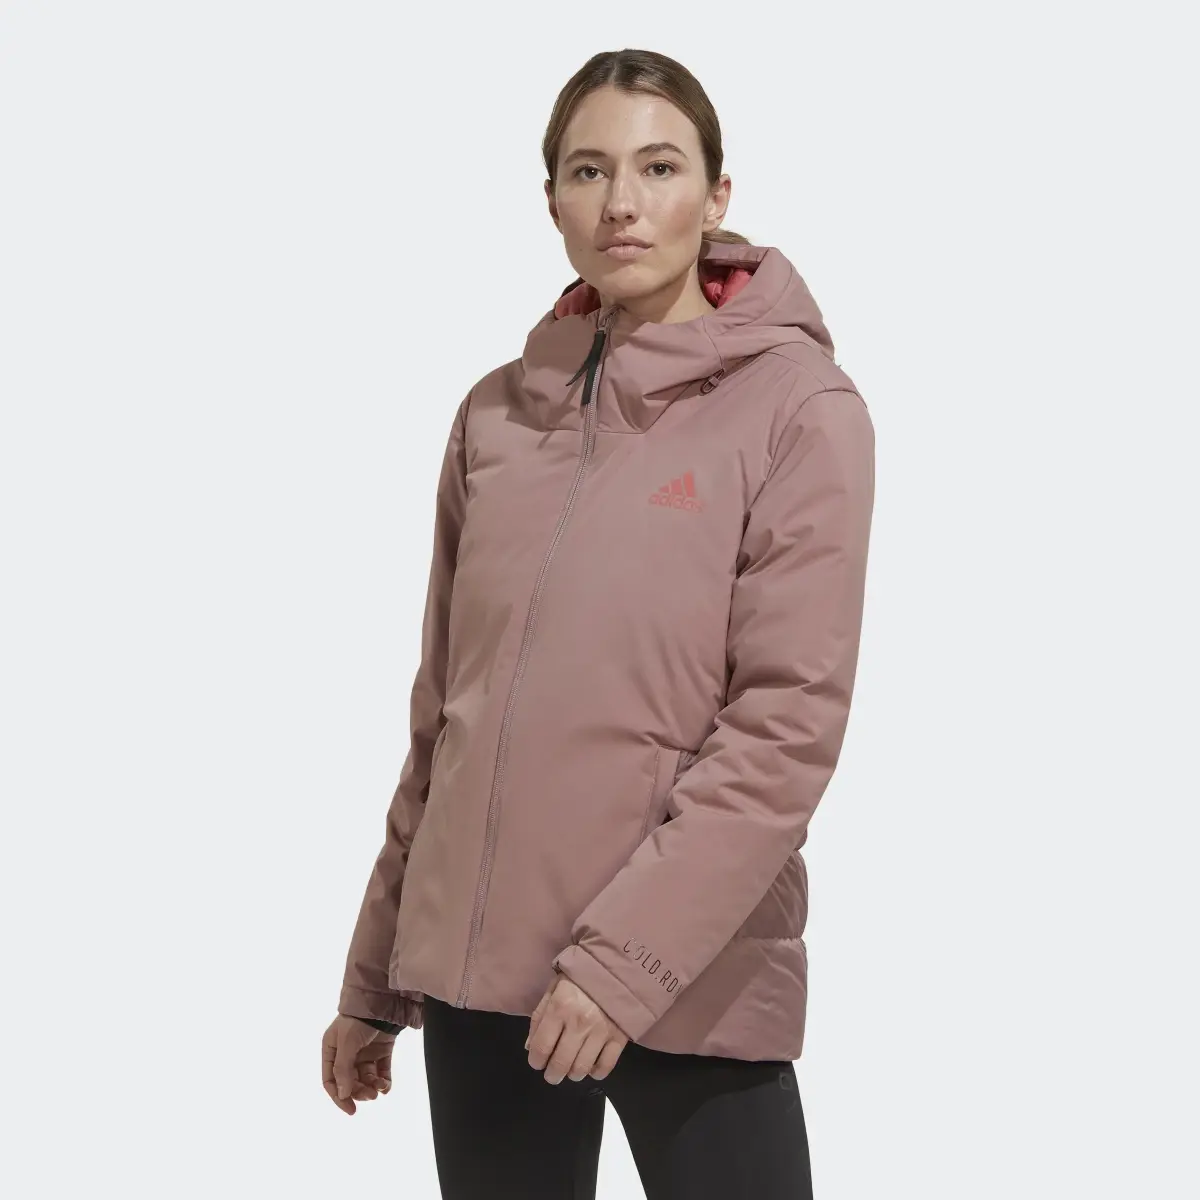 Adidas Traveer COLD.RDY Jacket. 2